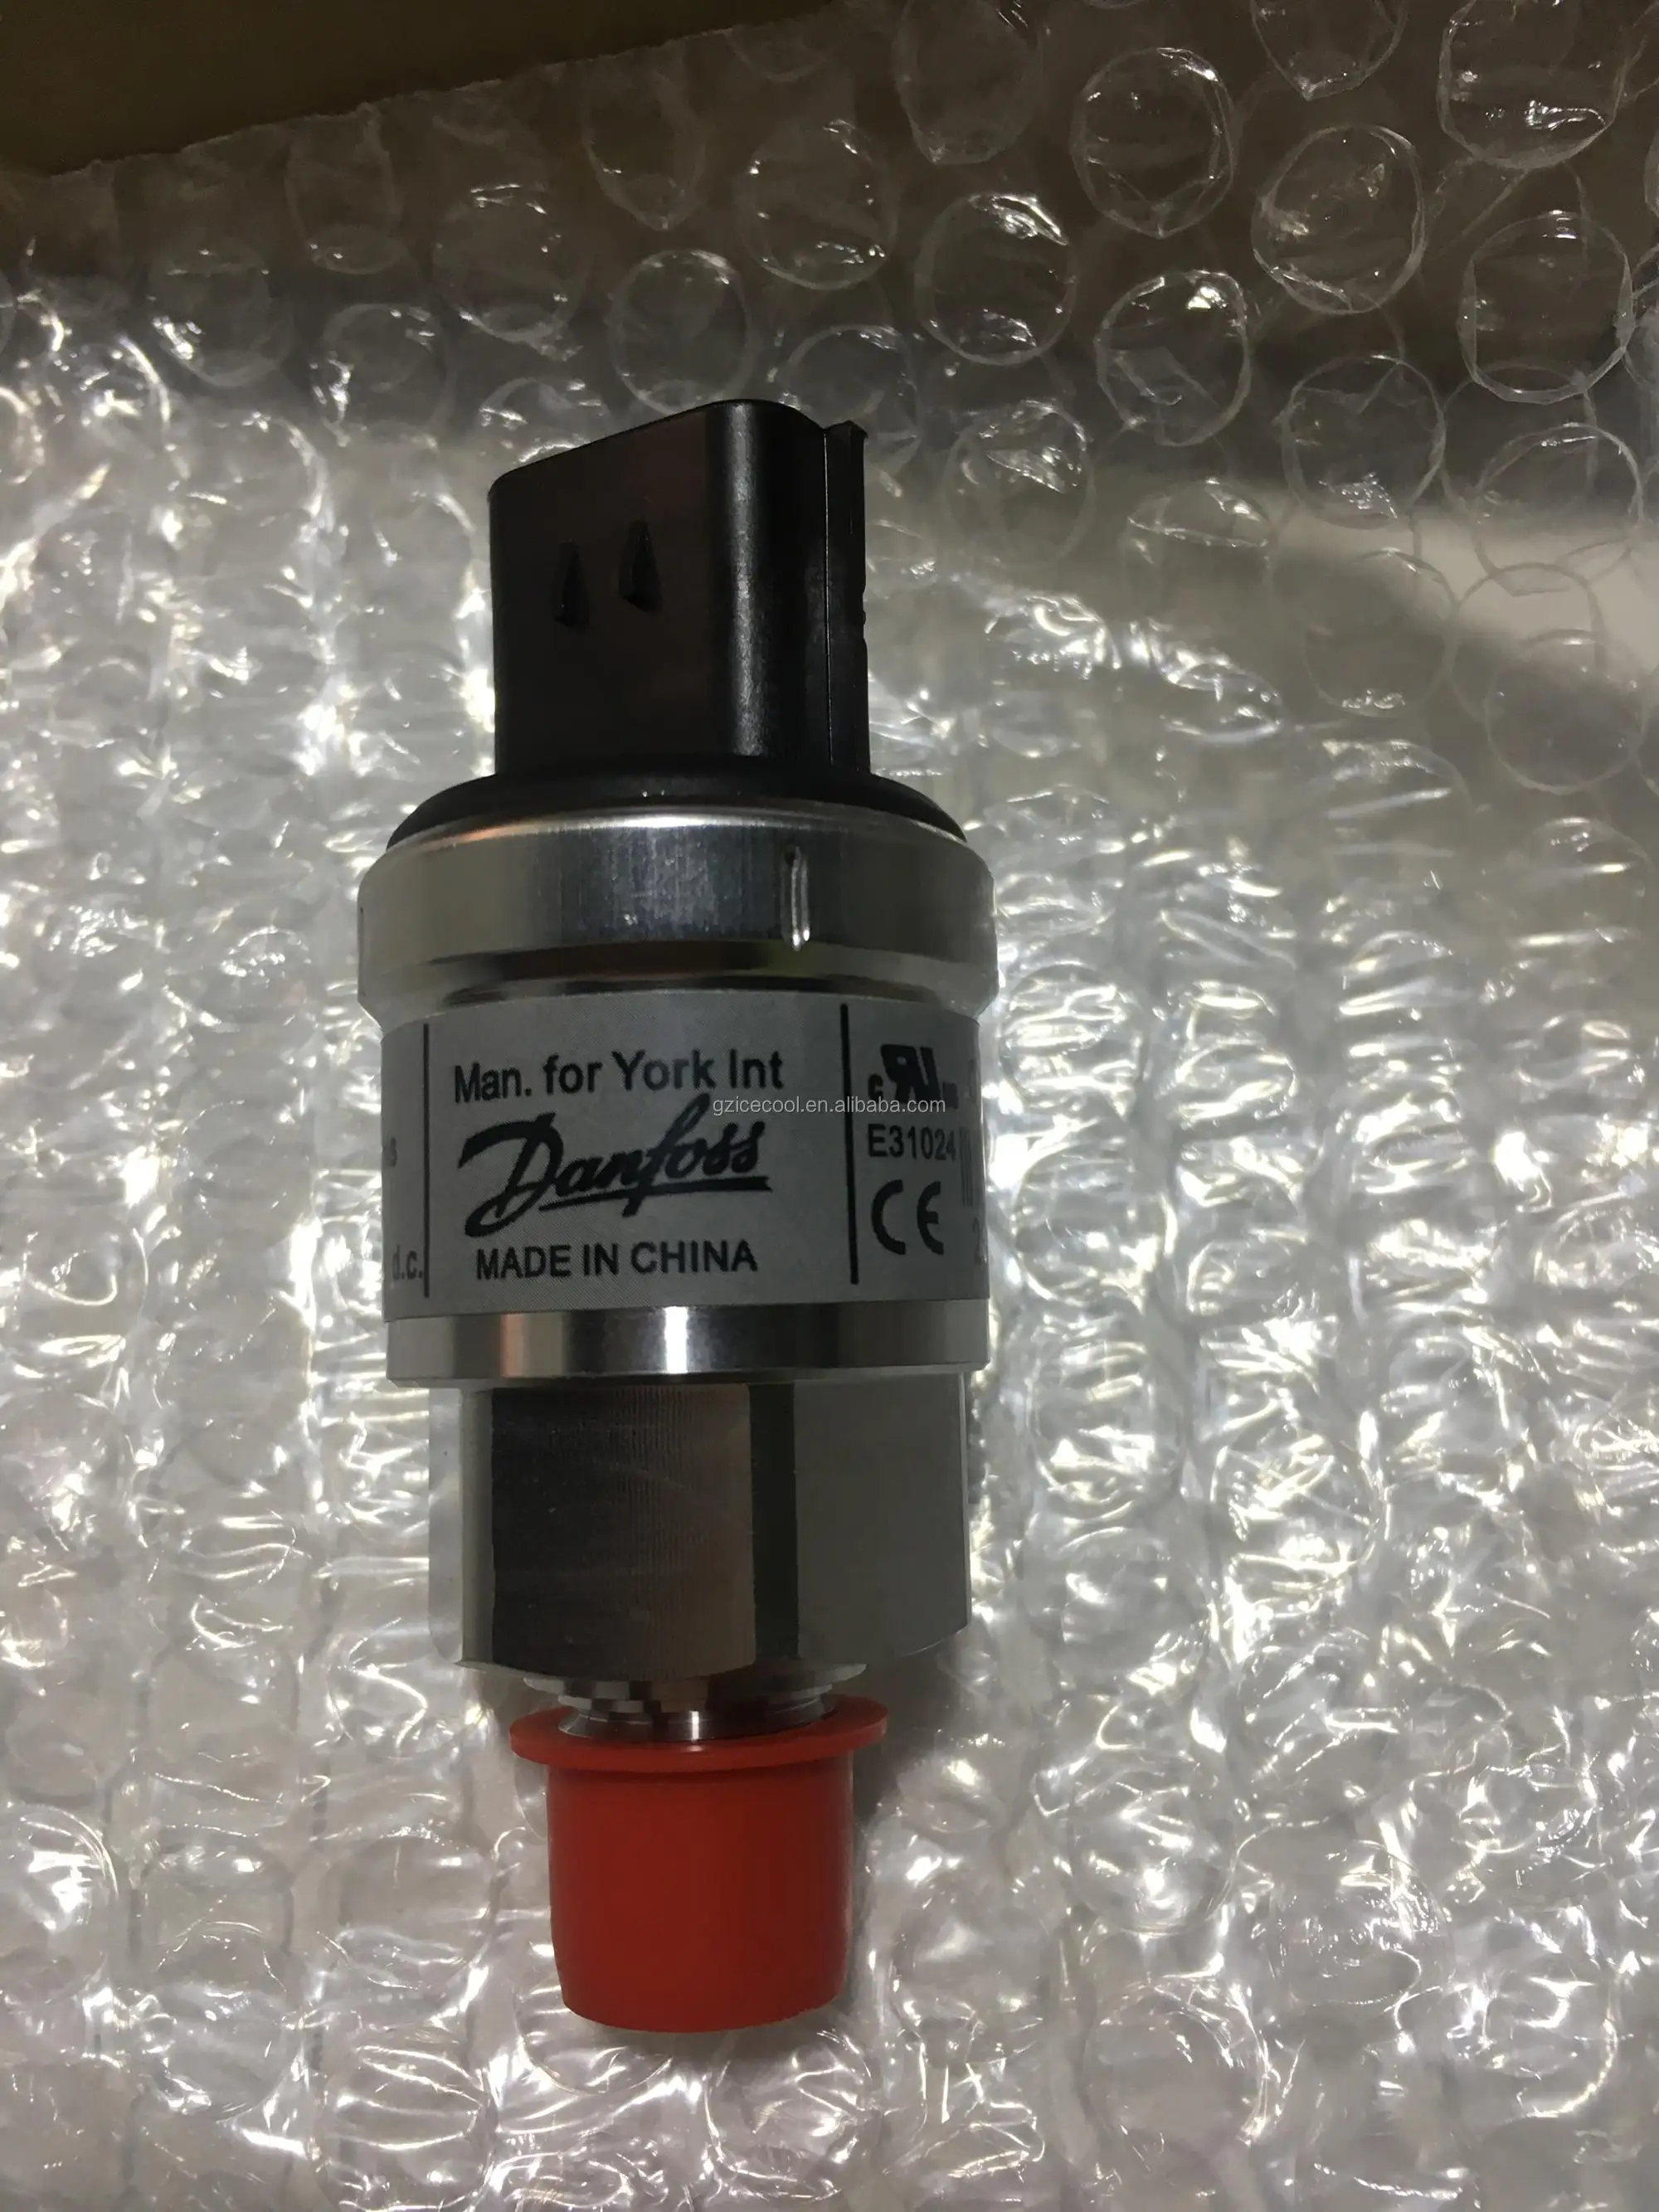 replacing pressure transducer for york ycal